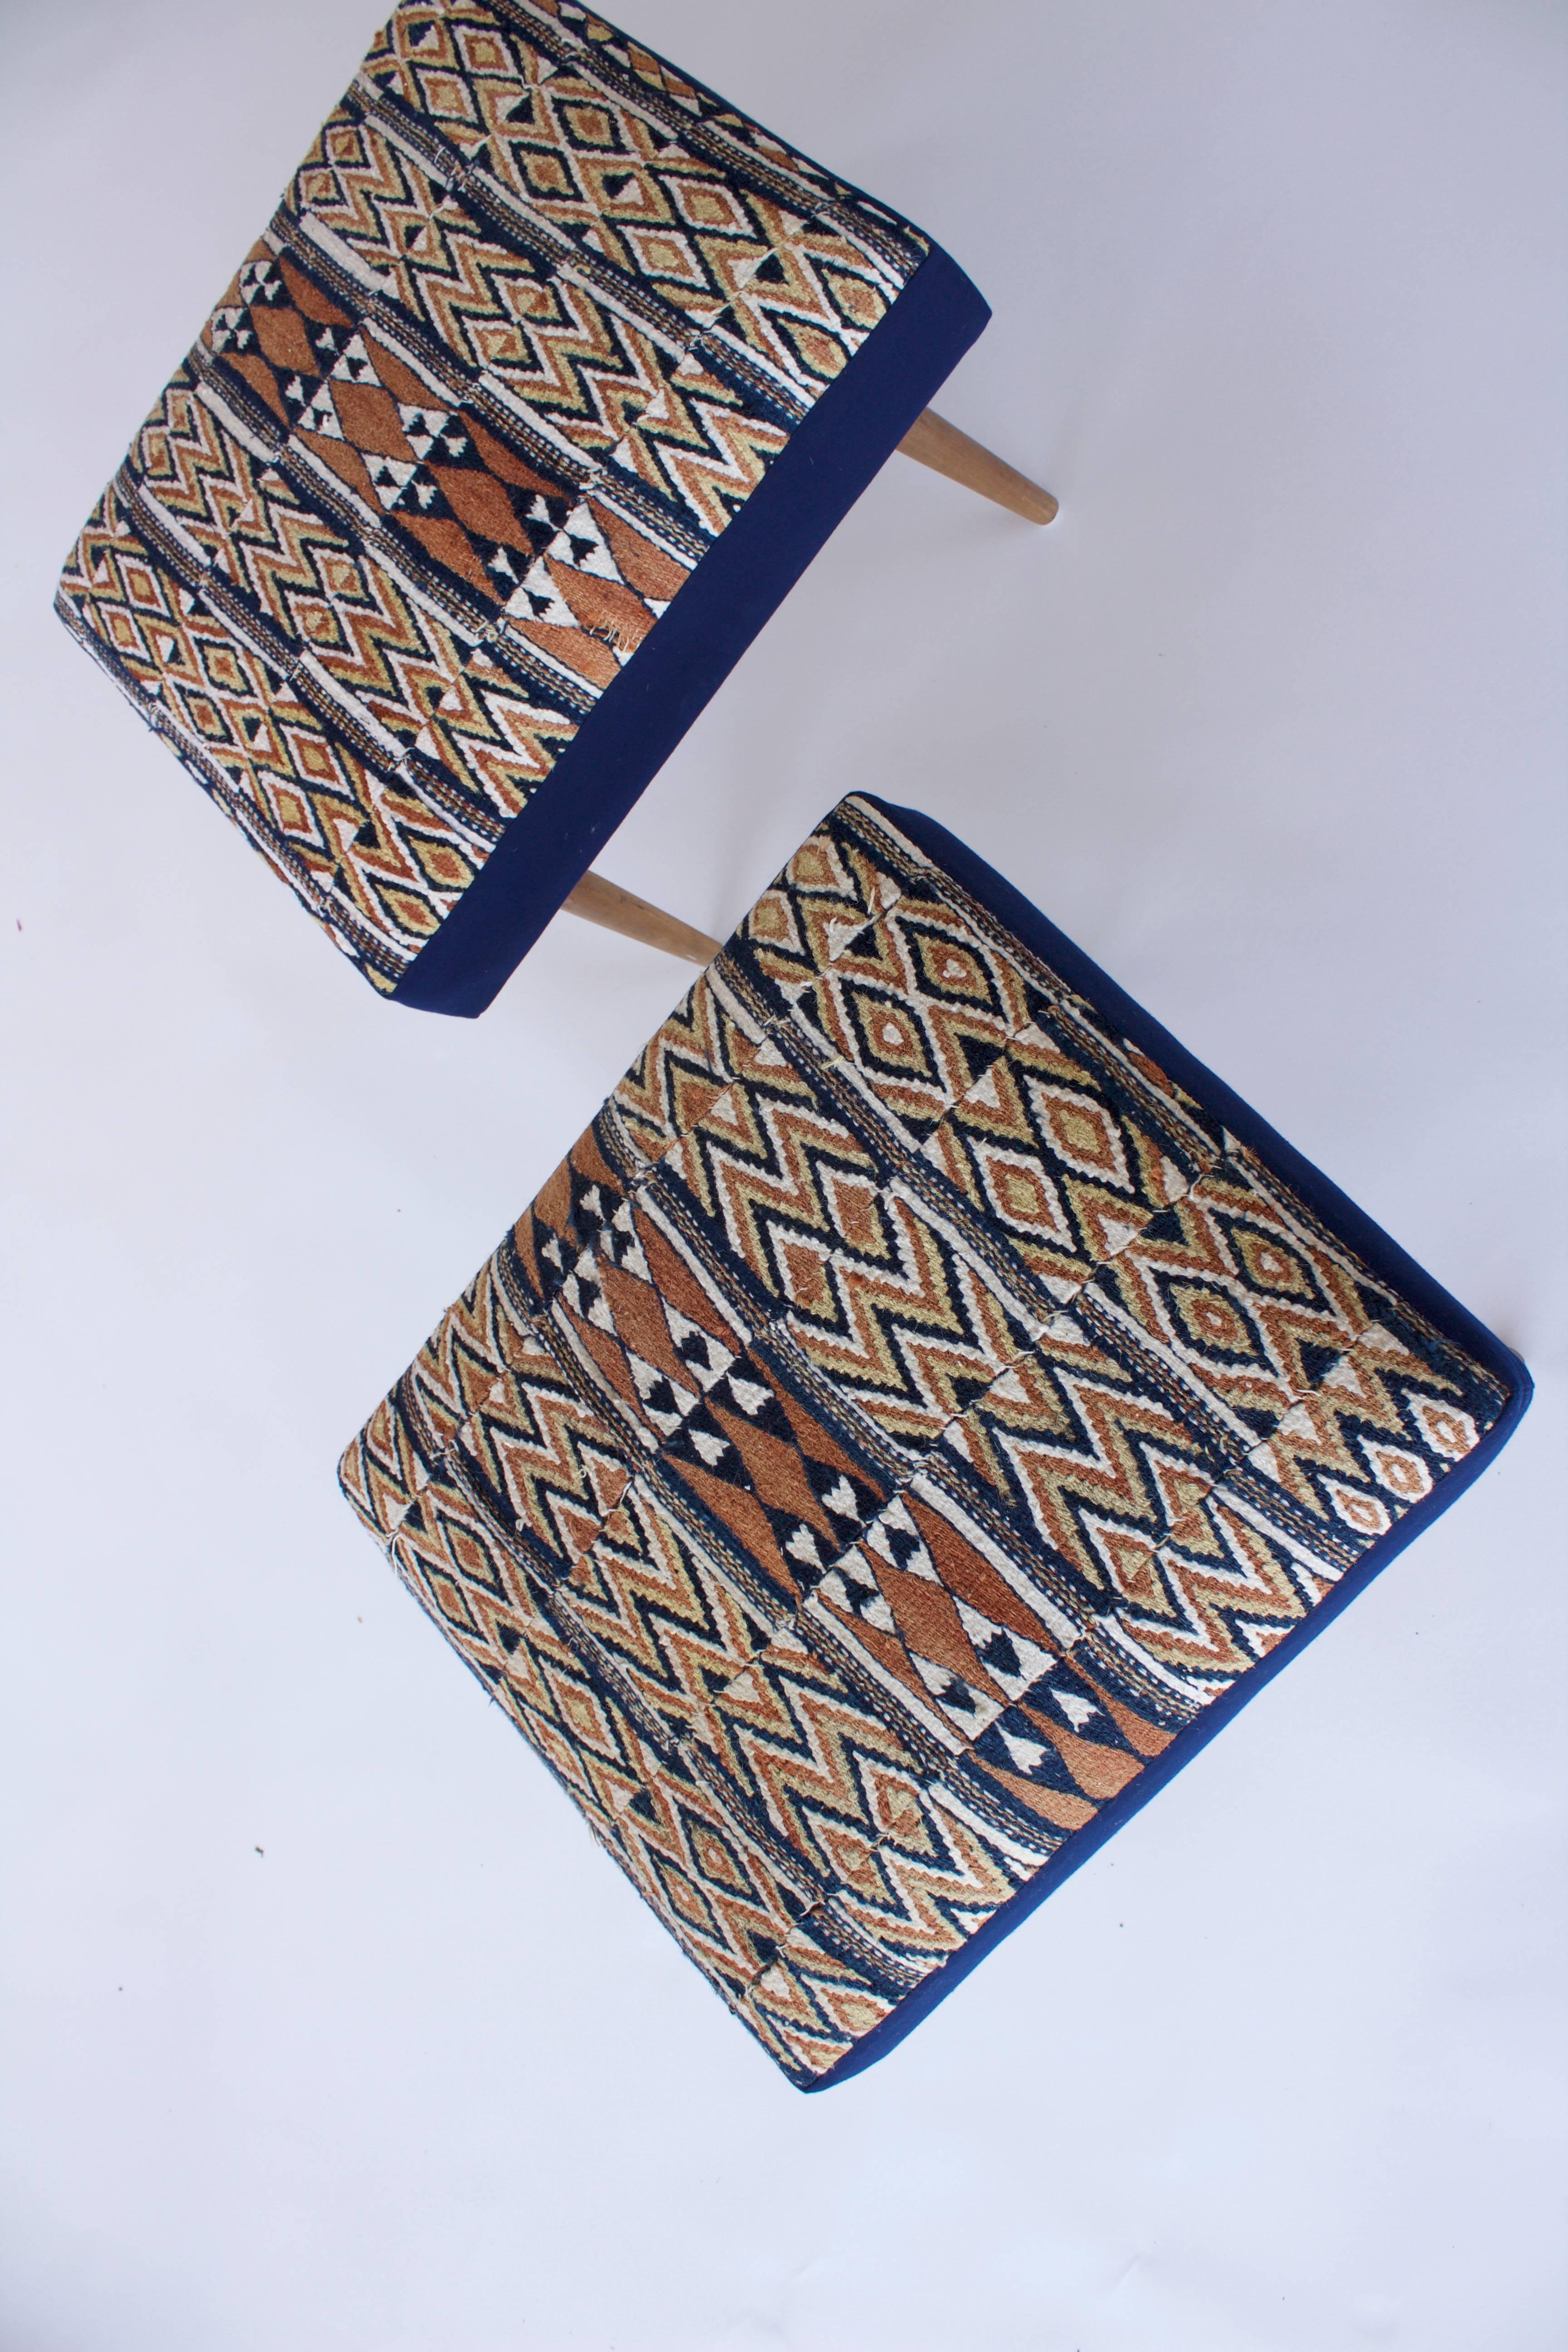 Handy upholstered pair of vintage stools from France in the Mid-Century newly upholstered in a great vintage African textile.